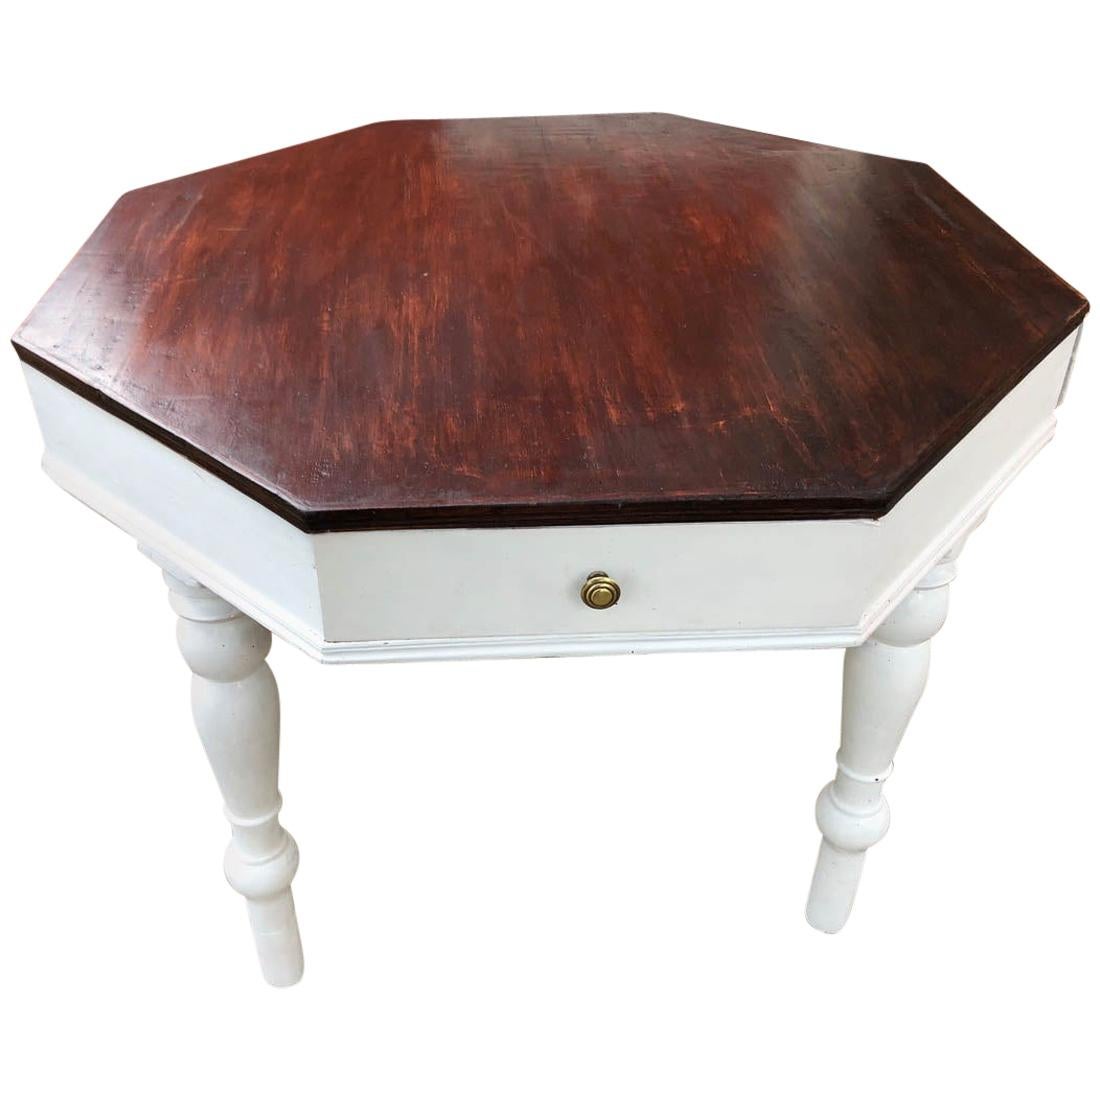  Italian Fir Octagonal Table Special Design Restored Wax Polished For Sale